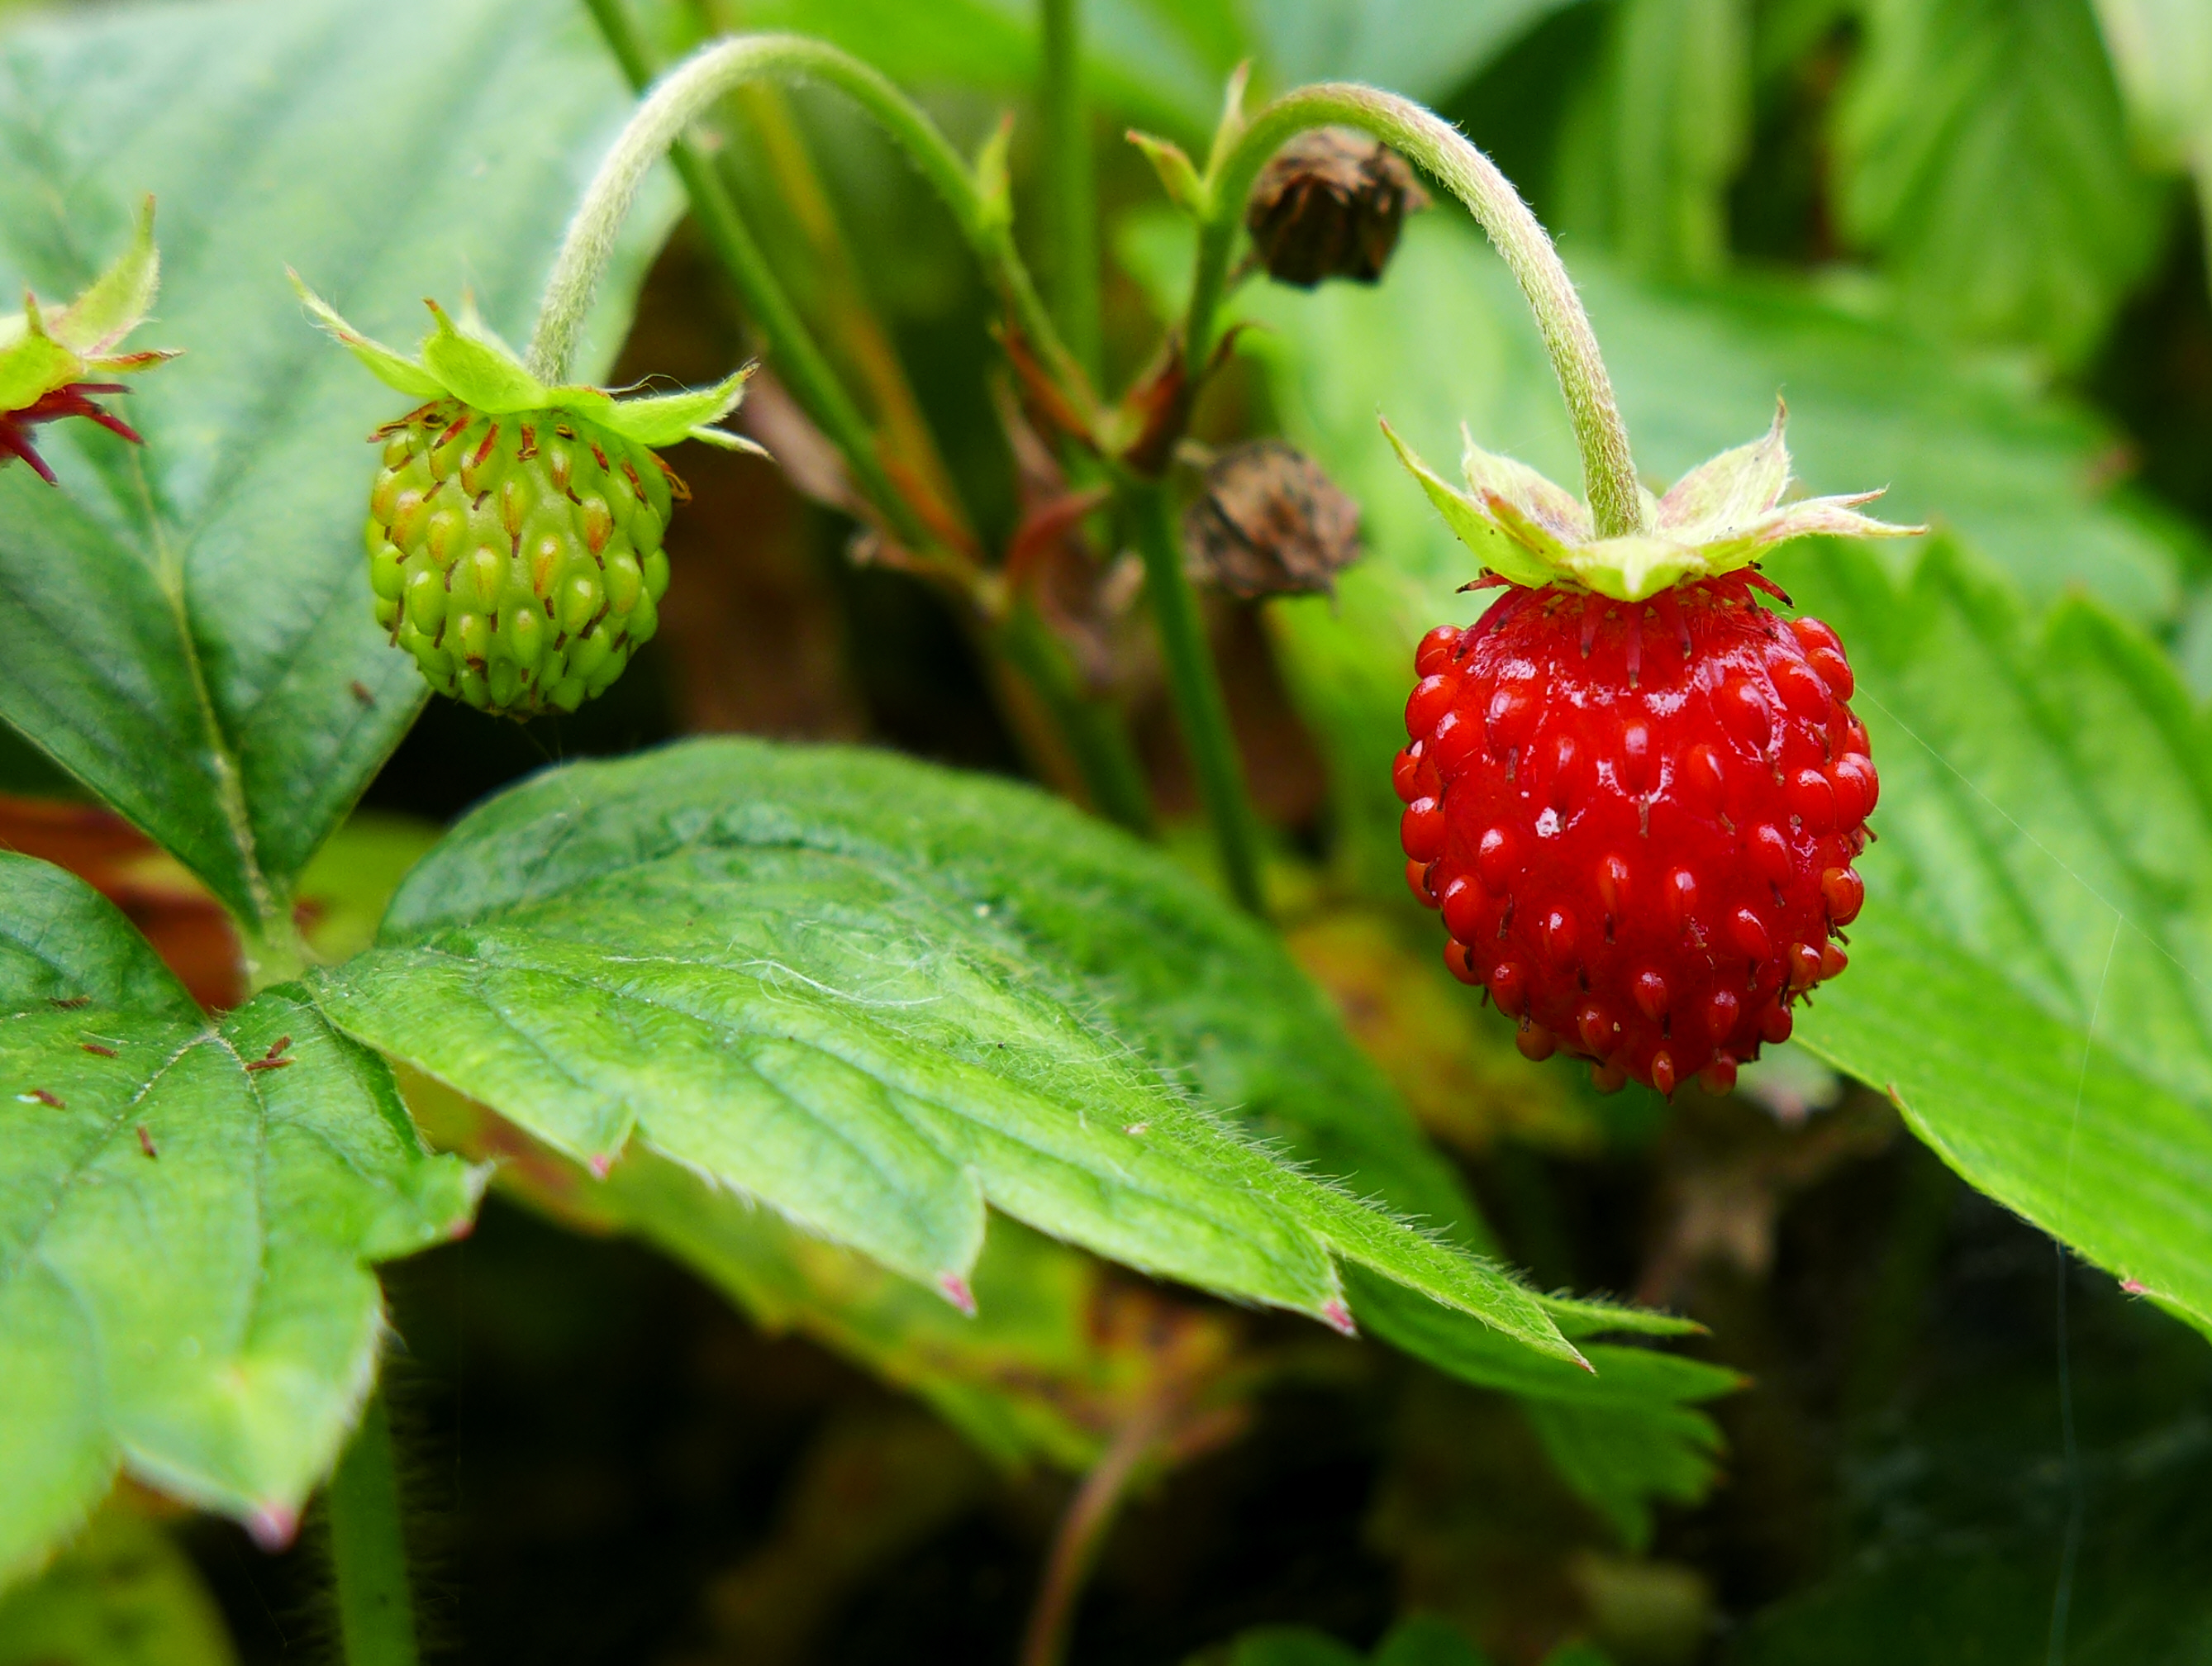 Weed That Looks Like Strawberry Plant: #3 Is 1 Of The Most Invasive ...